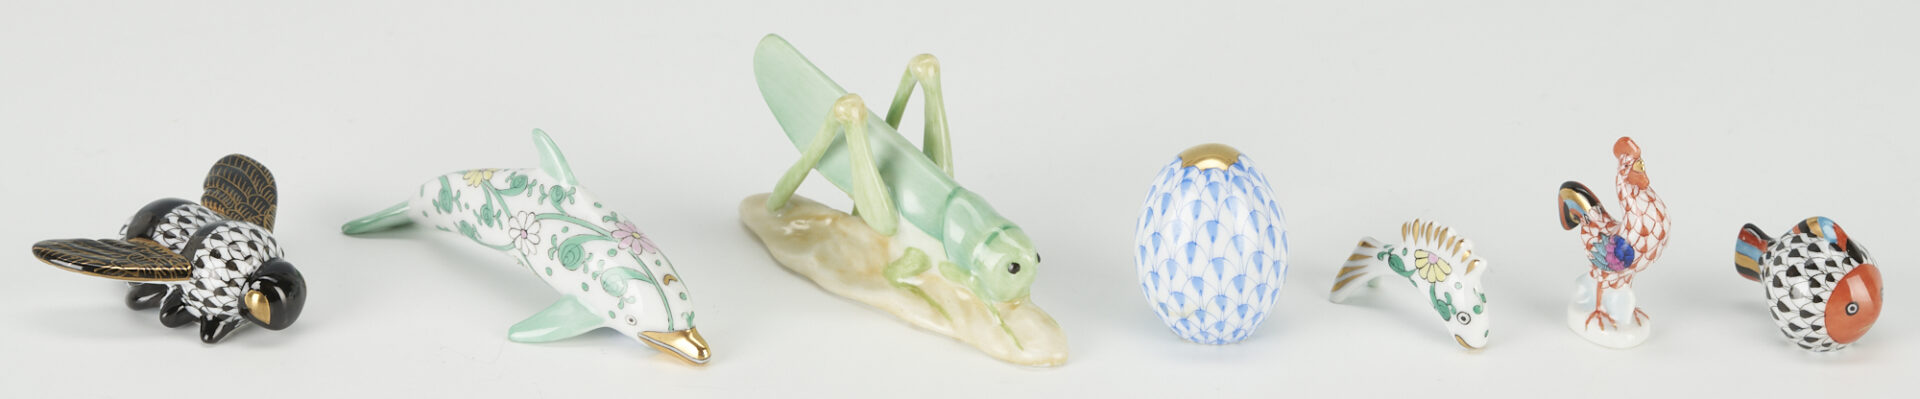 Lot 744: 15 Herend Small Figurines, incl. Grasshopper, Bee & Sailboat